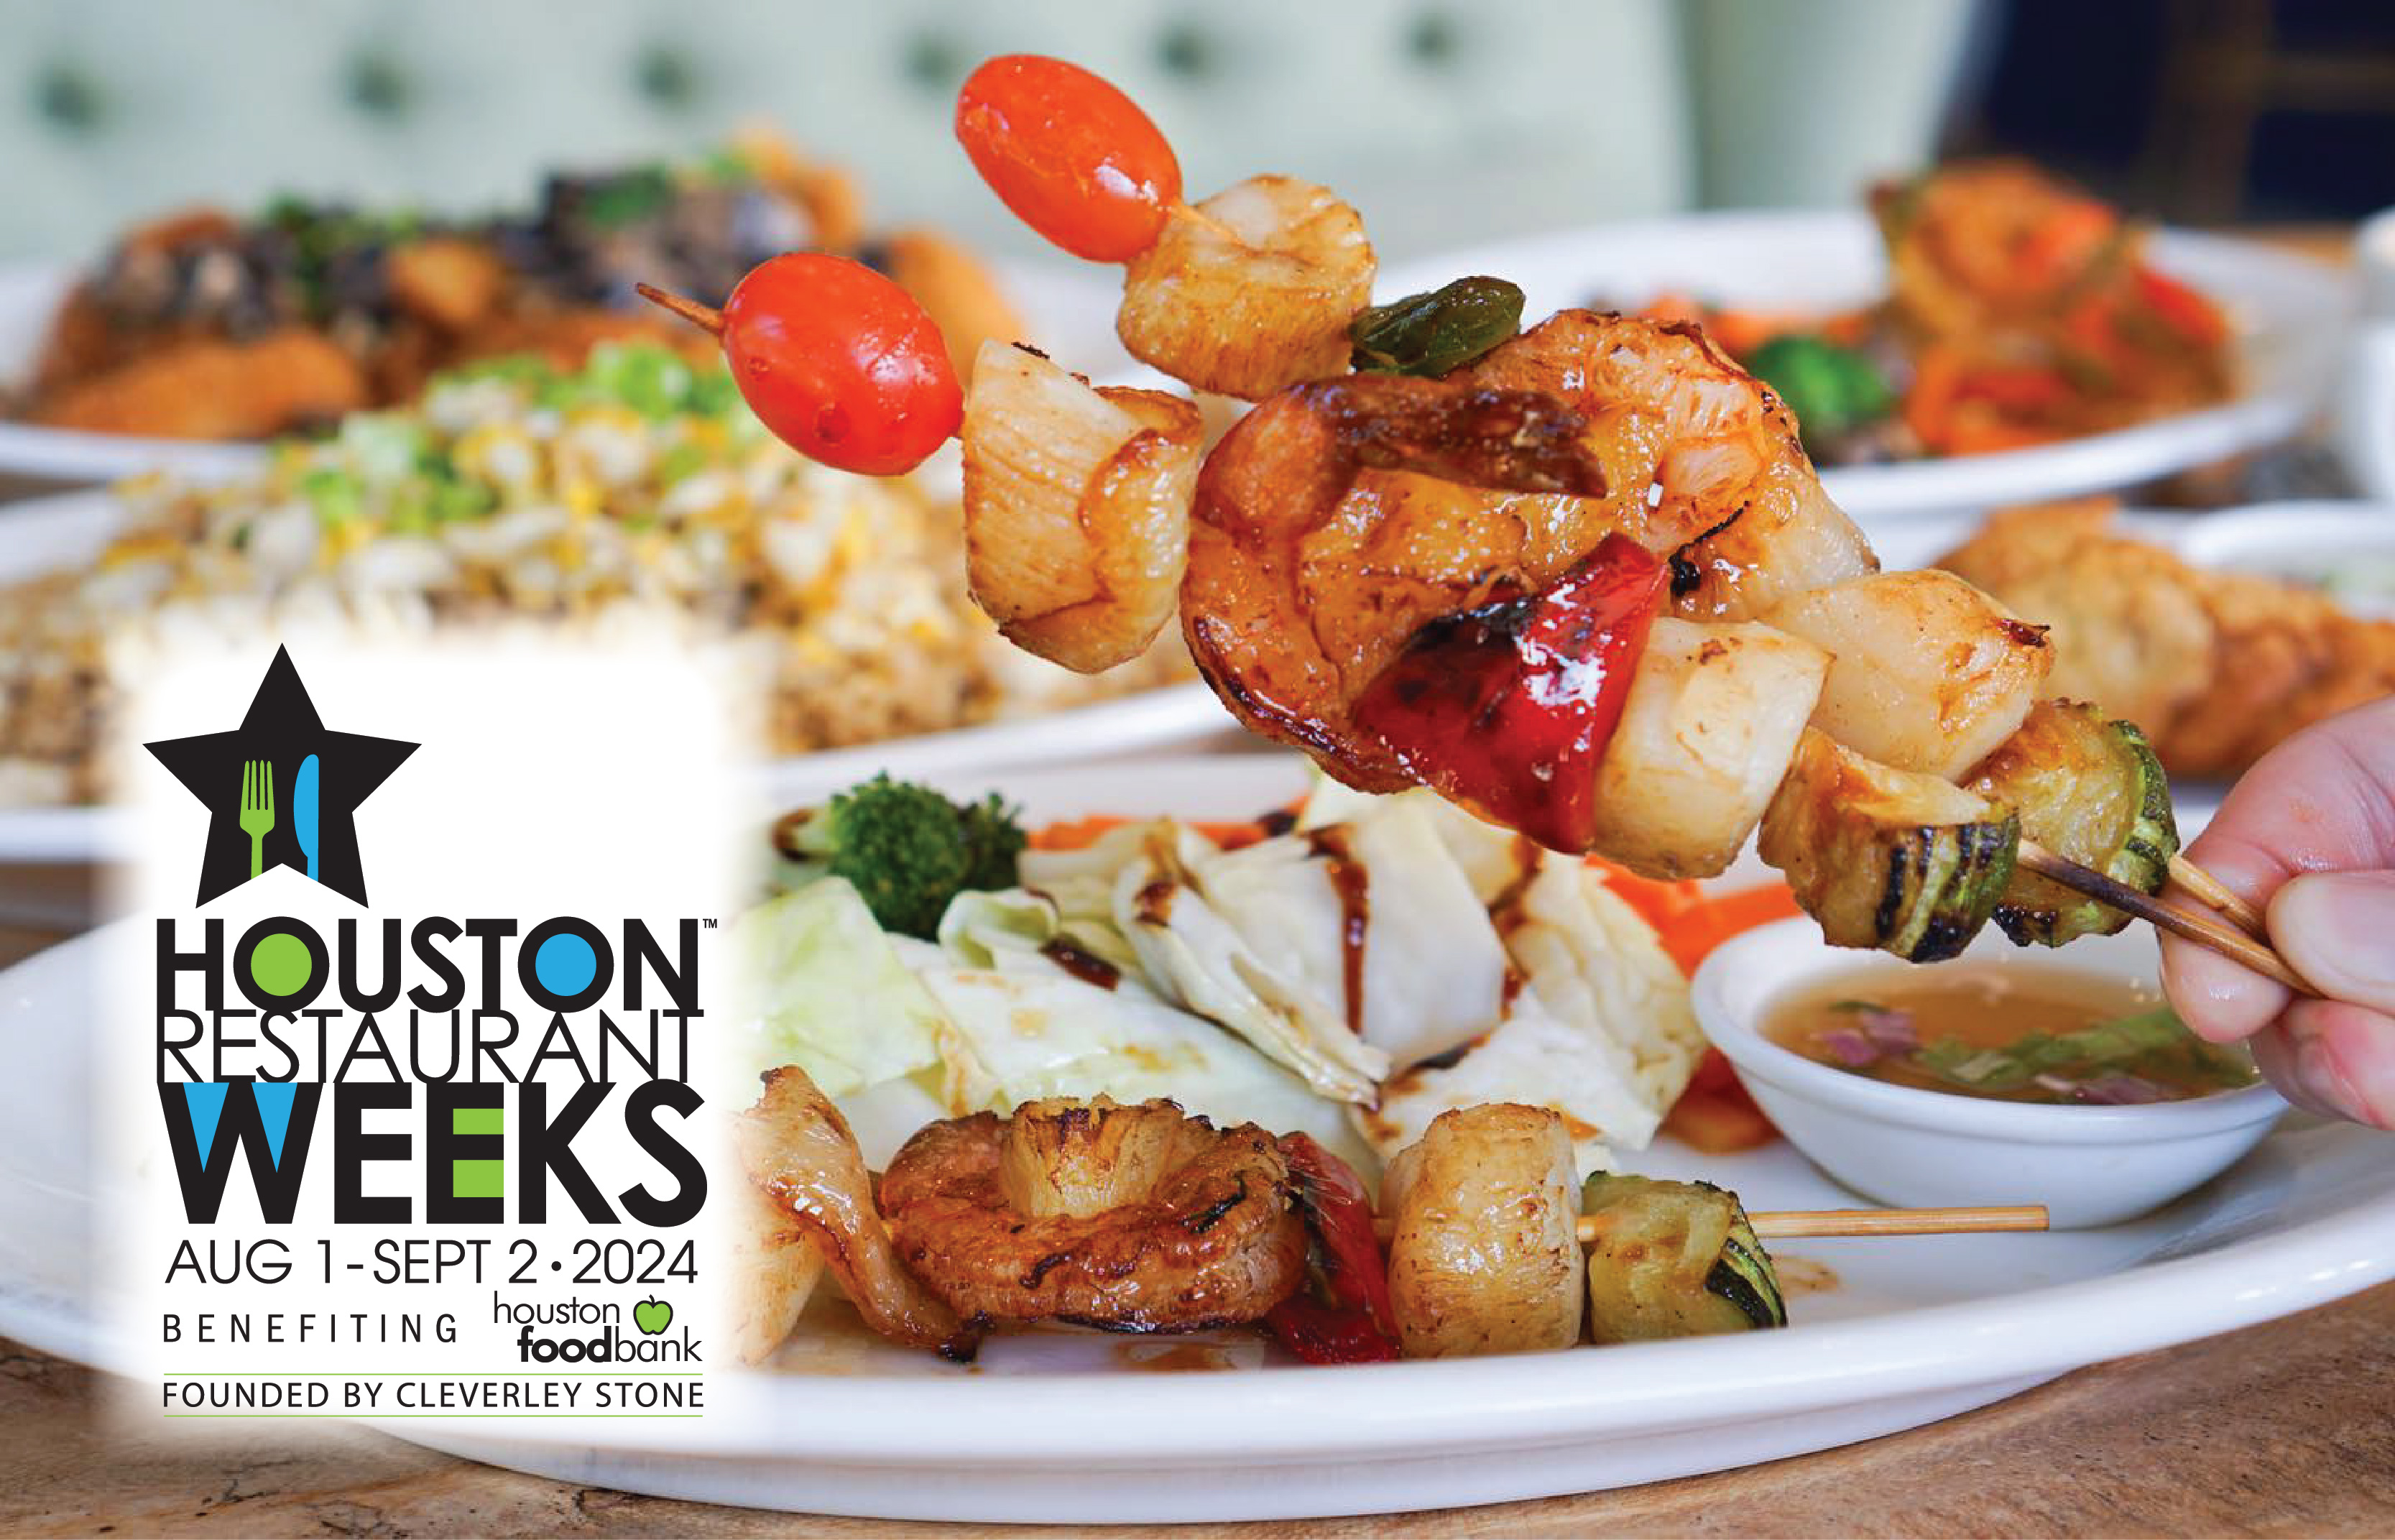 Houston Restaurant Weeks Releases First Round of Menus for Annual Event, Including Many Restaurants in Katy